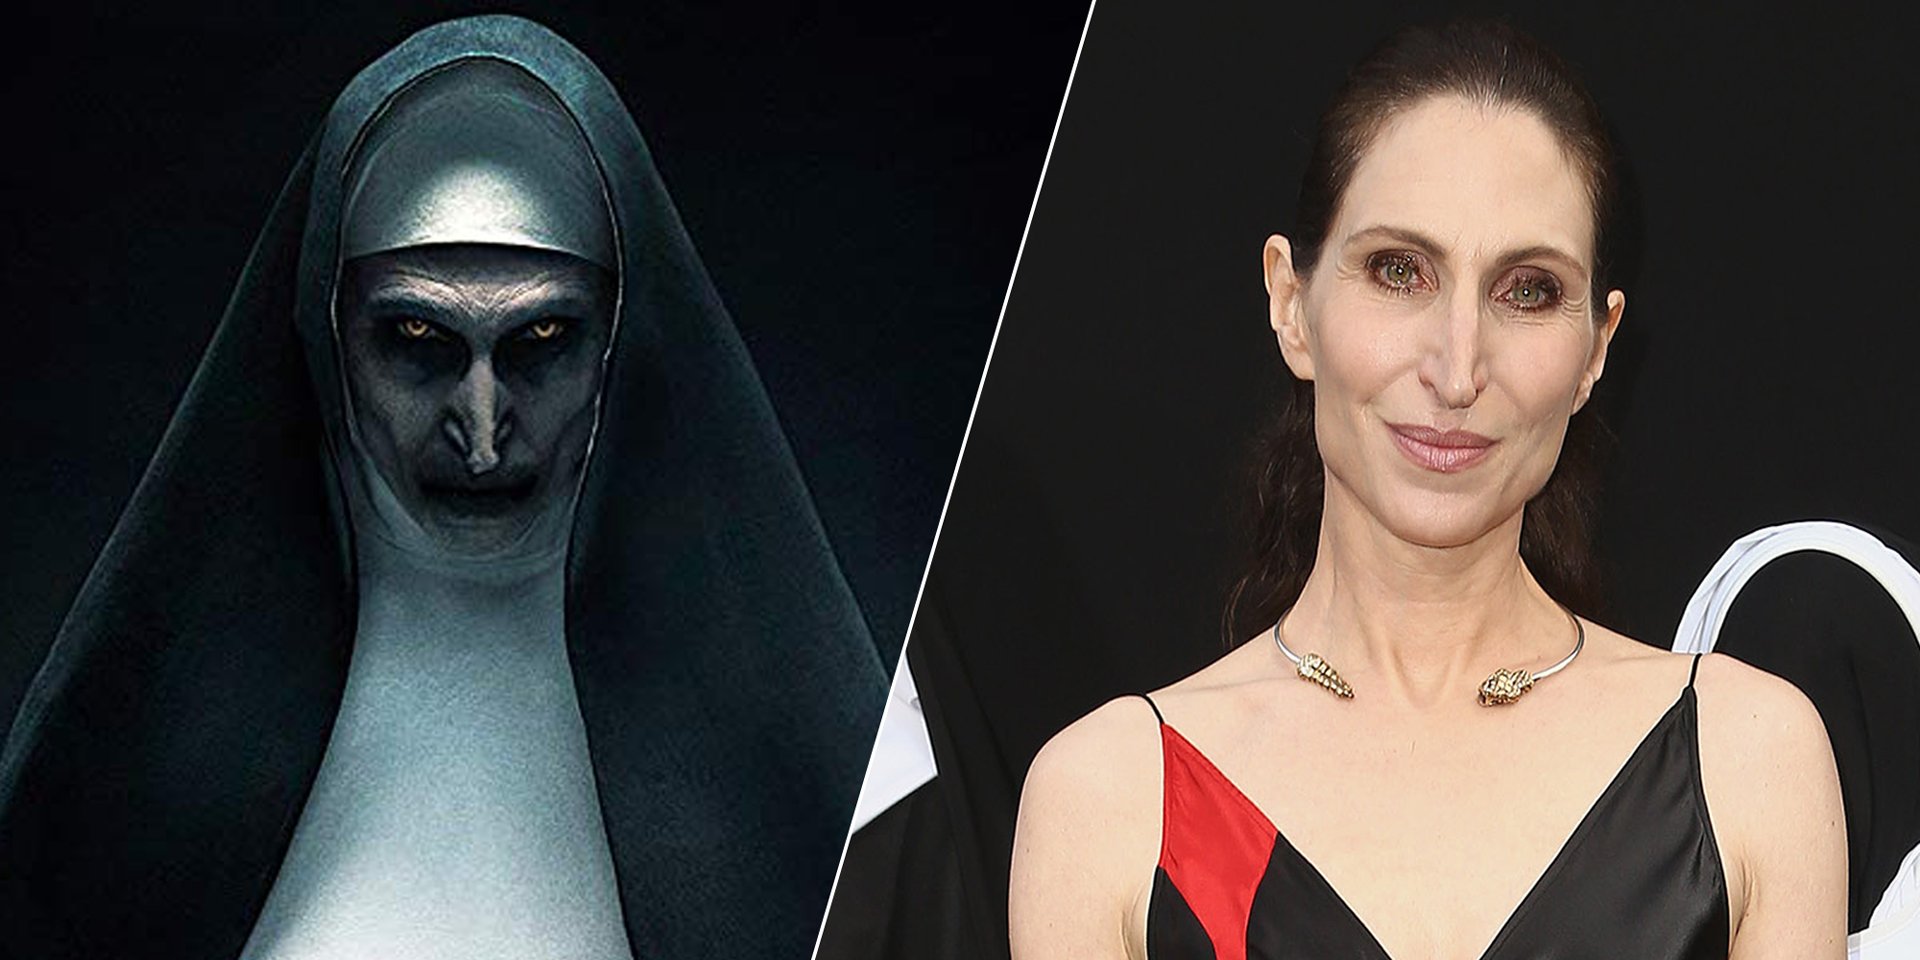 Real Life Of The Actress Who Played The Nun Is Very Interesting